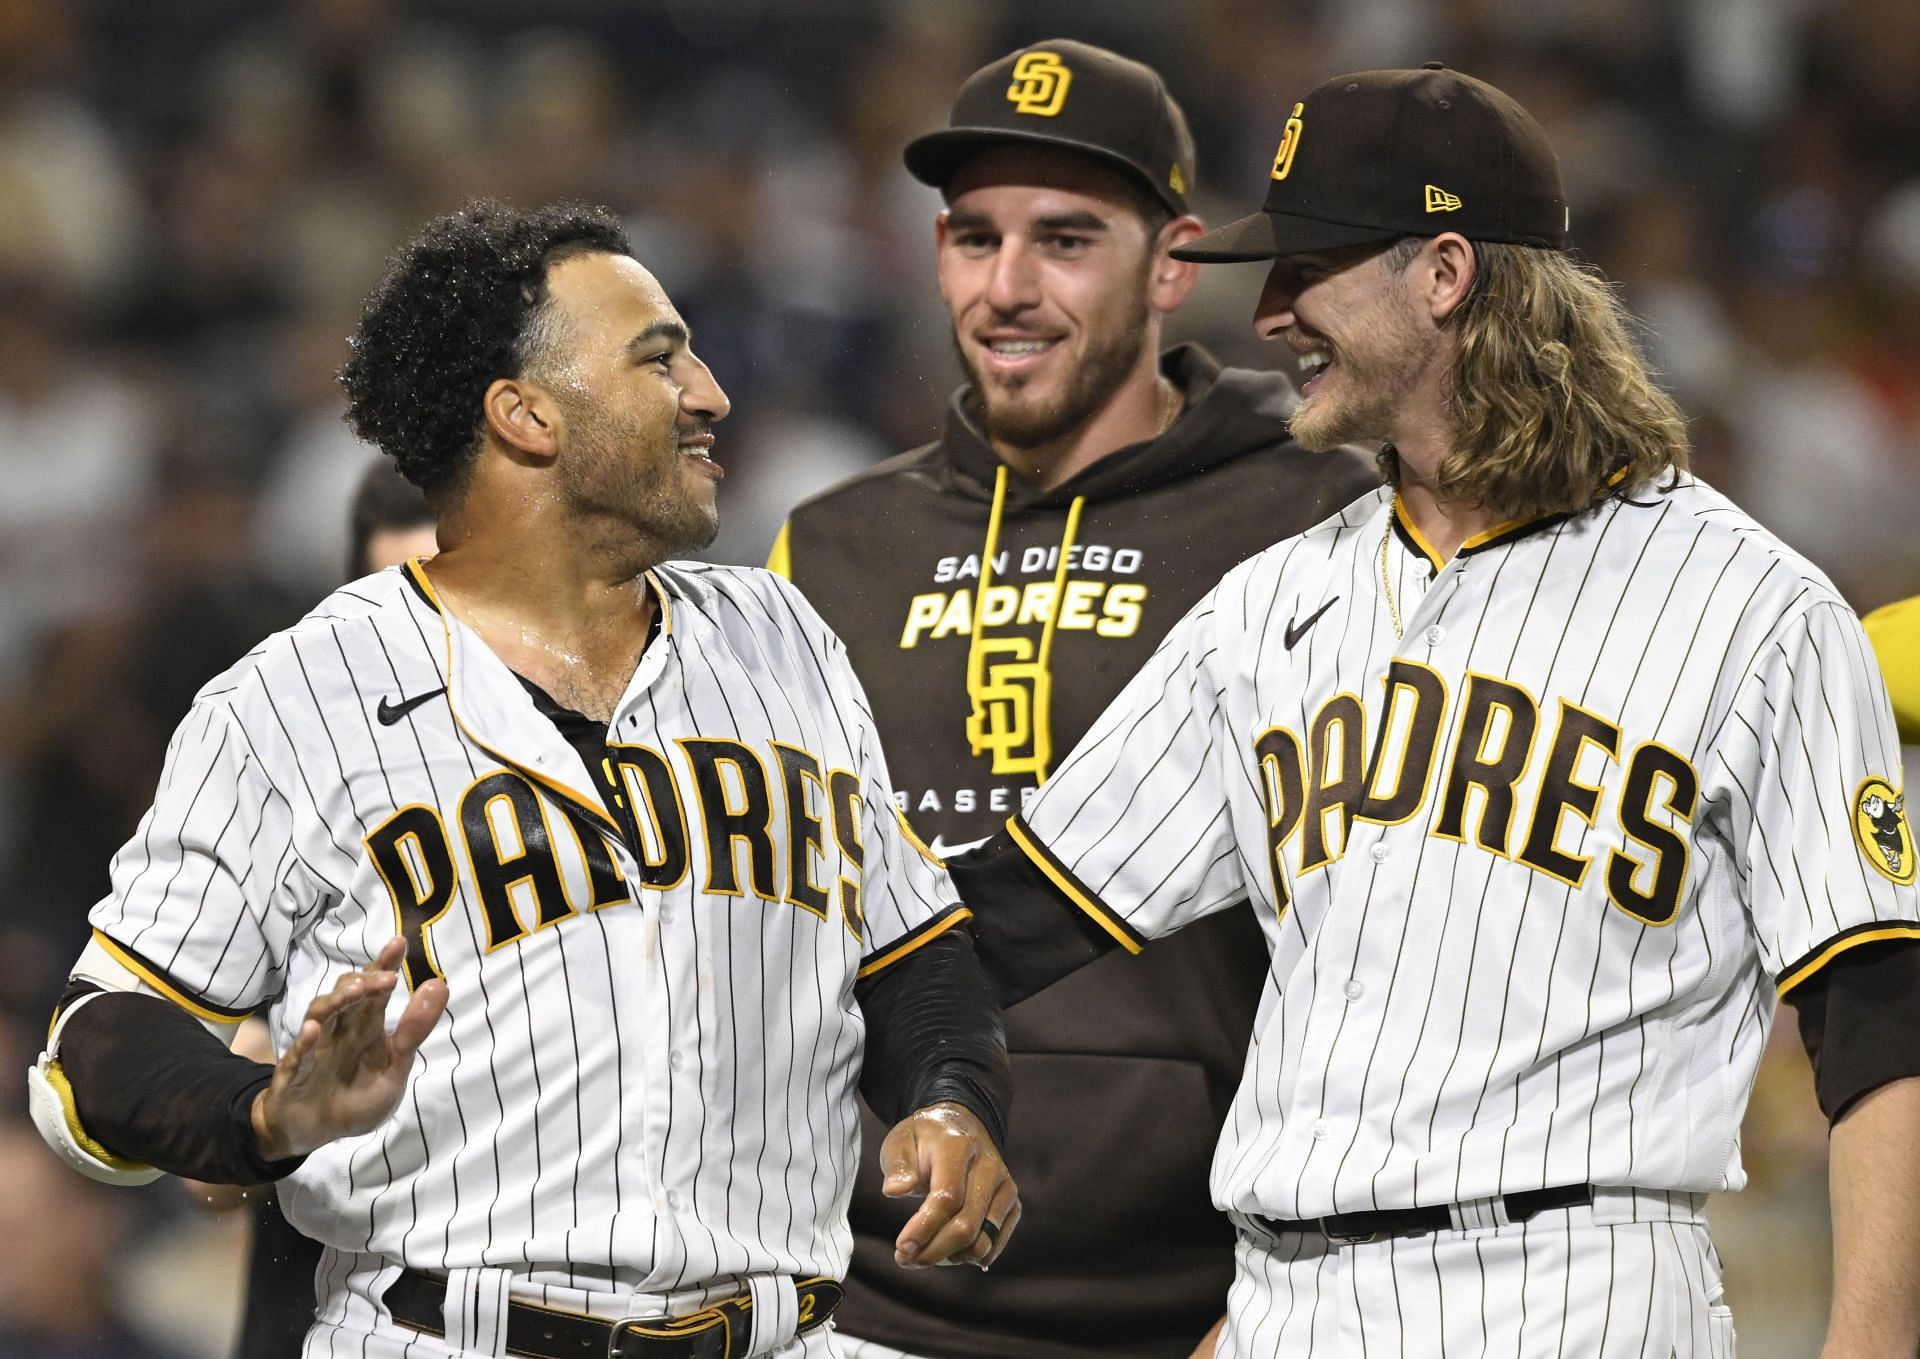 Josh Hader is greeted by teammates after completing a Colorado Rockies vs. San Diego Padres - game two.